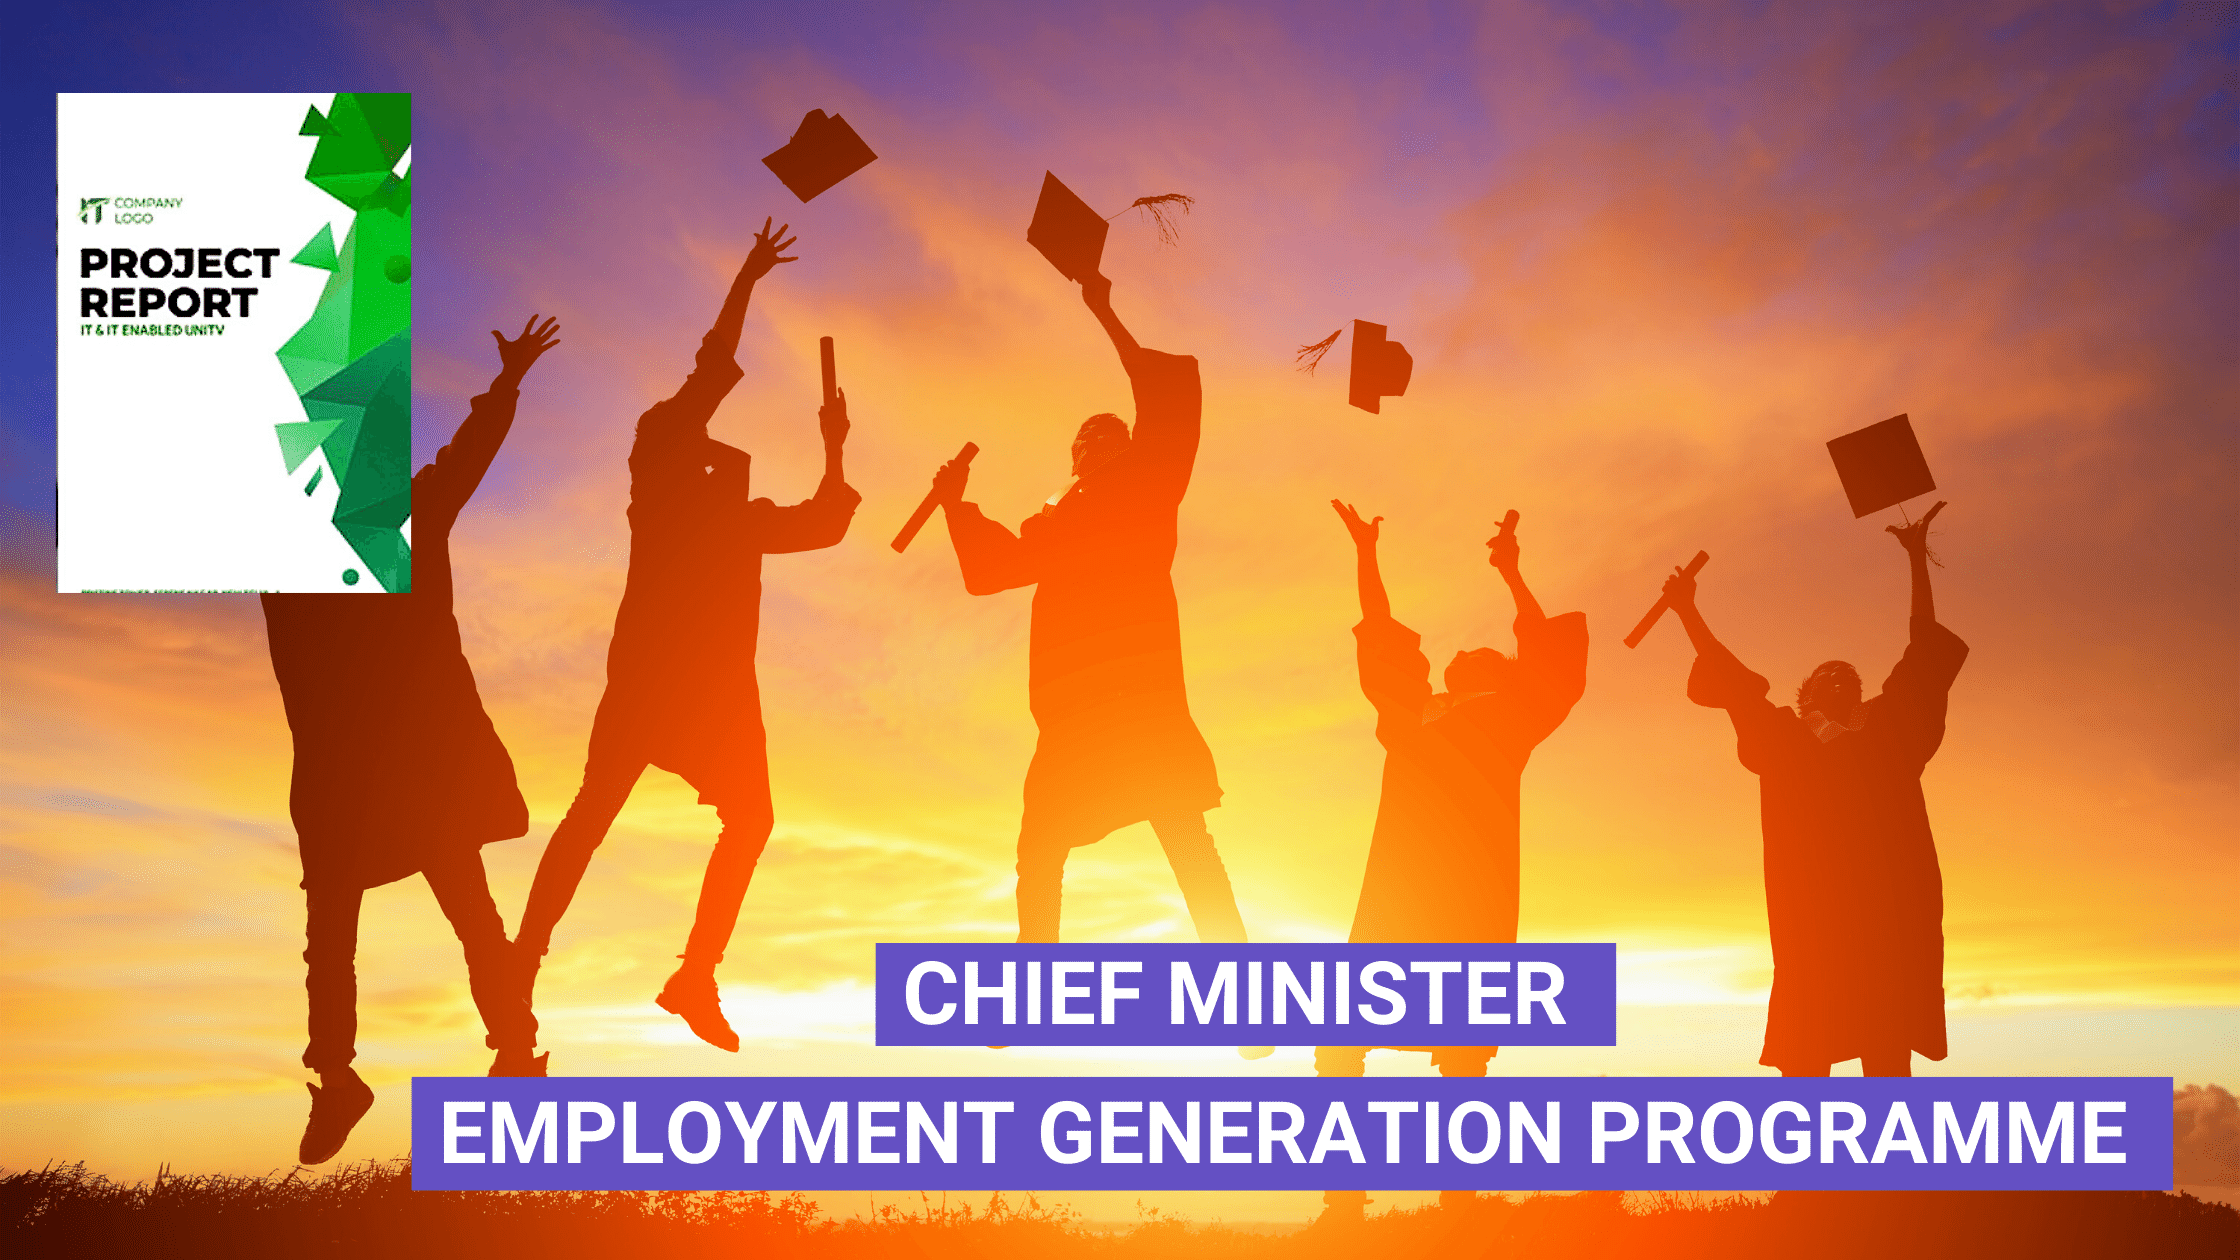 Chief Minister Employment Generation Programme